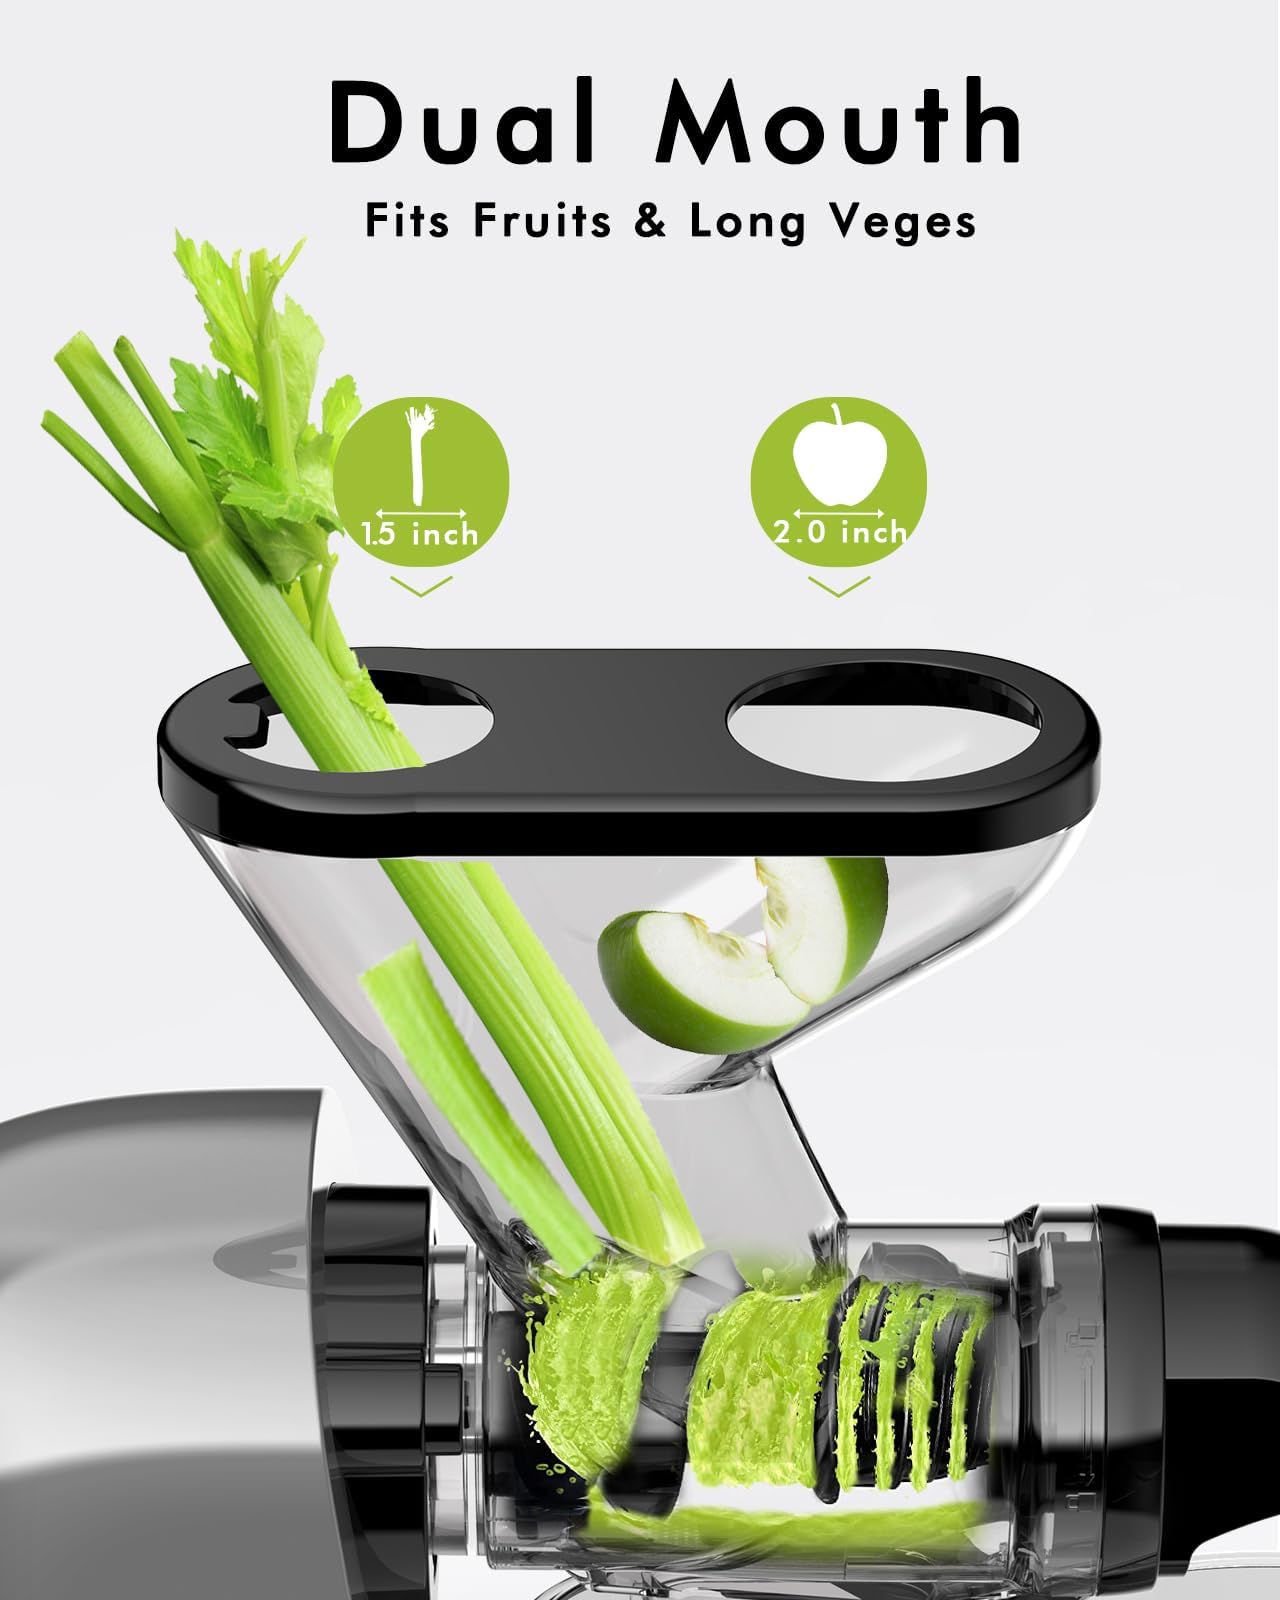 SiFENE Cold Press Juicer Machine, Compact, Quiet, Easy to Clean Slow Masticating Juicer with Dual Feed Chute, High Yield Juice Maker for Fruits and Vegetables, No Clogging, Grey